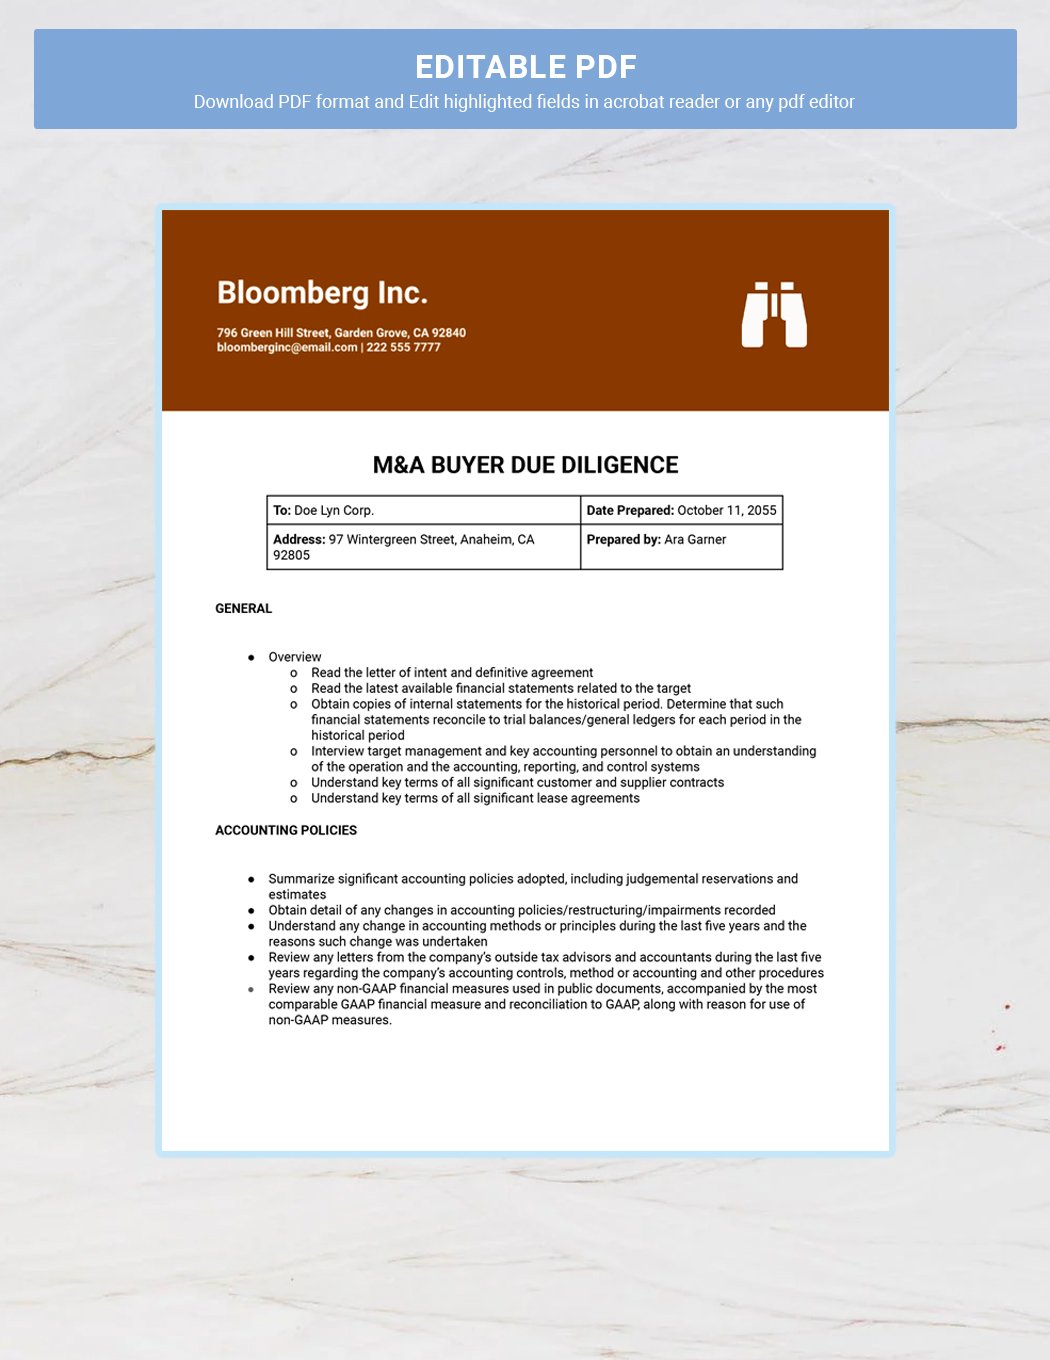 M&A Buyer Due Diligence Checklist